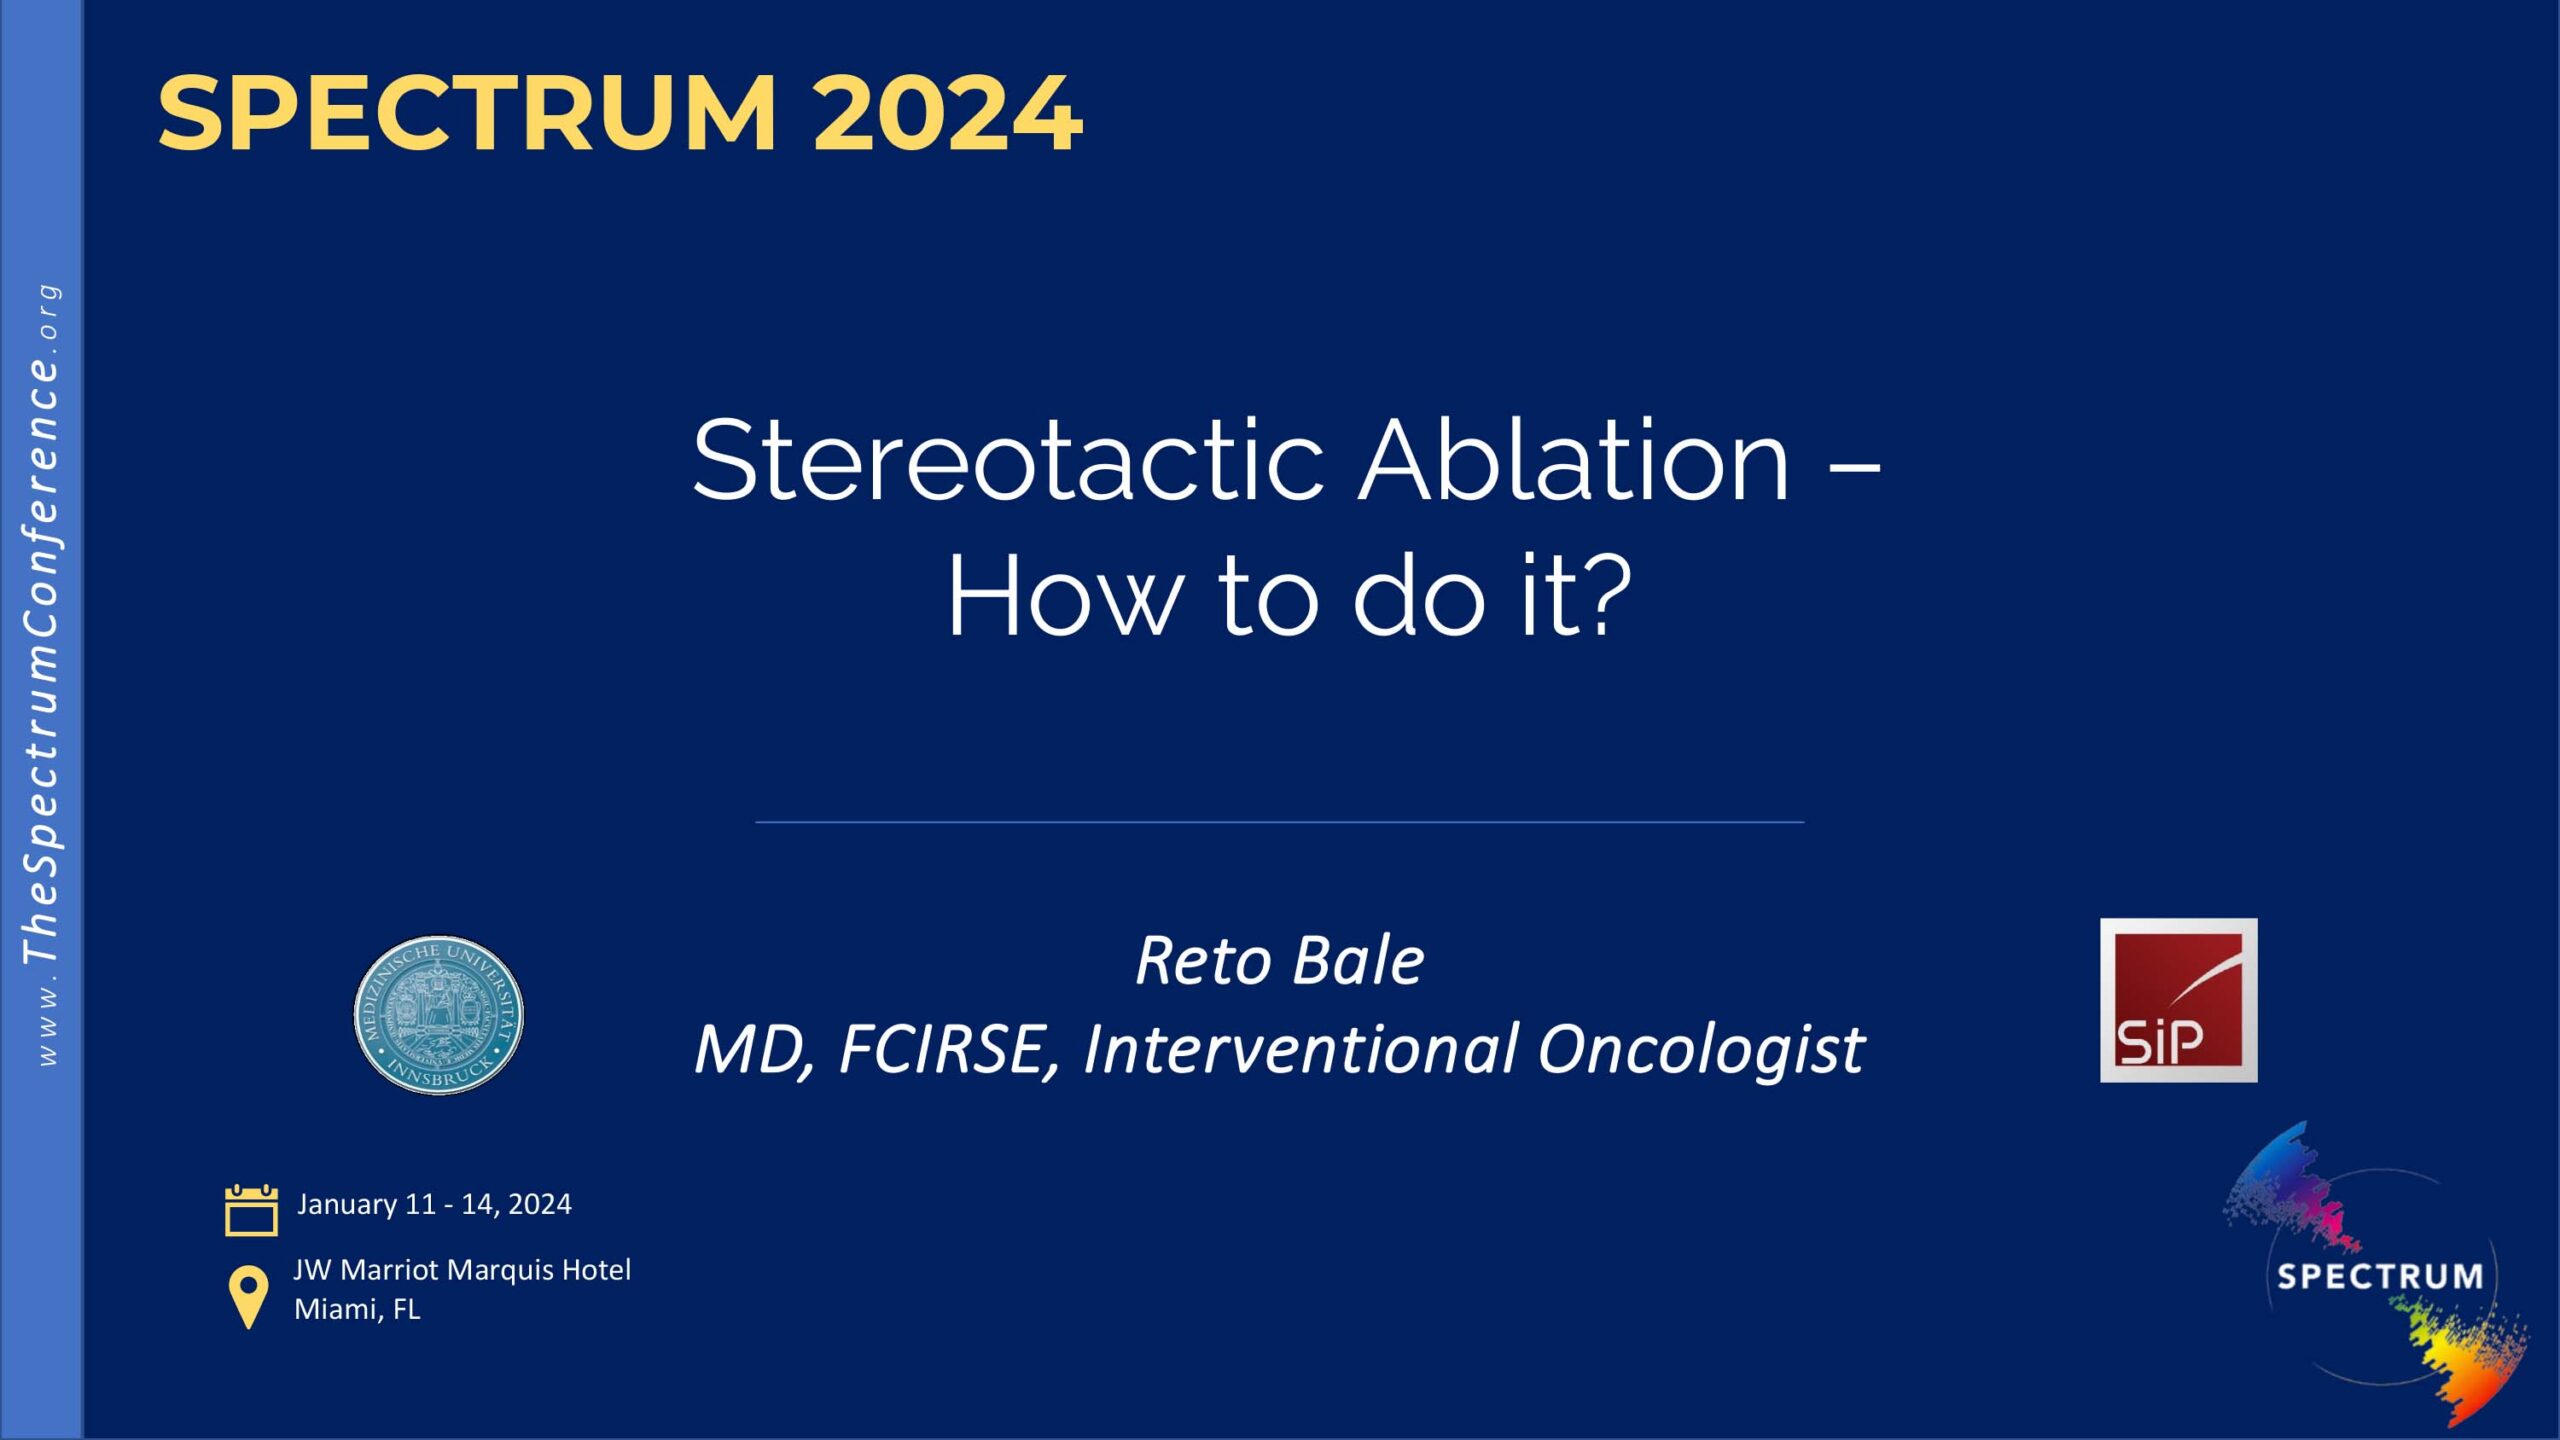 Stereotactic Ablation – How to do it?